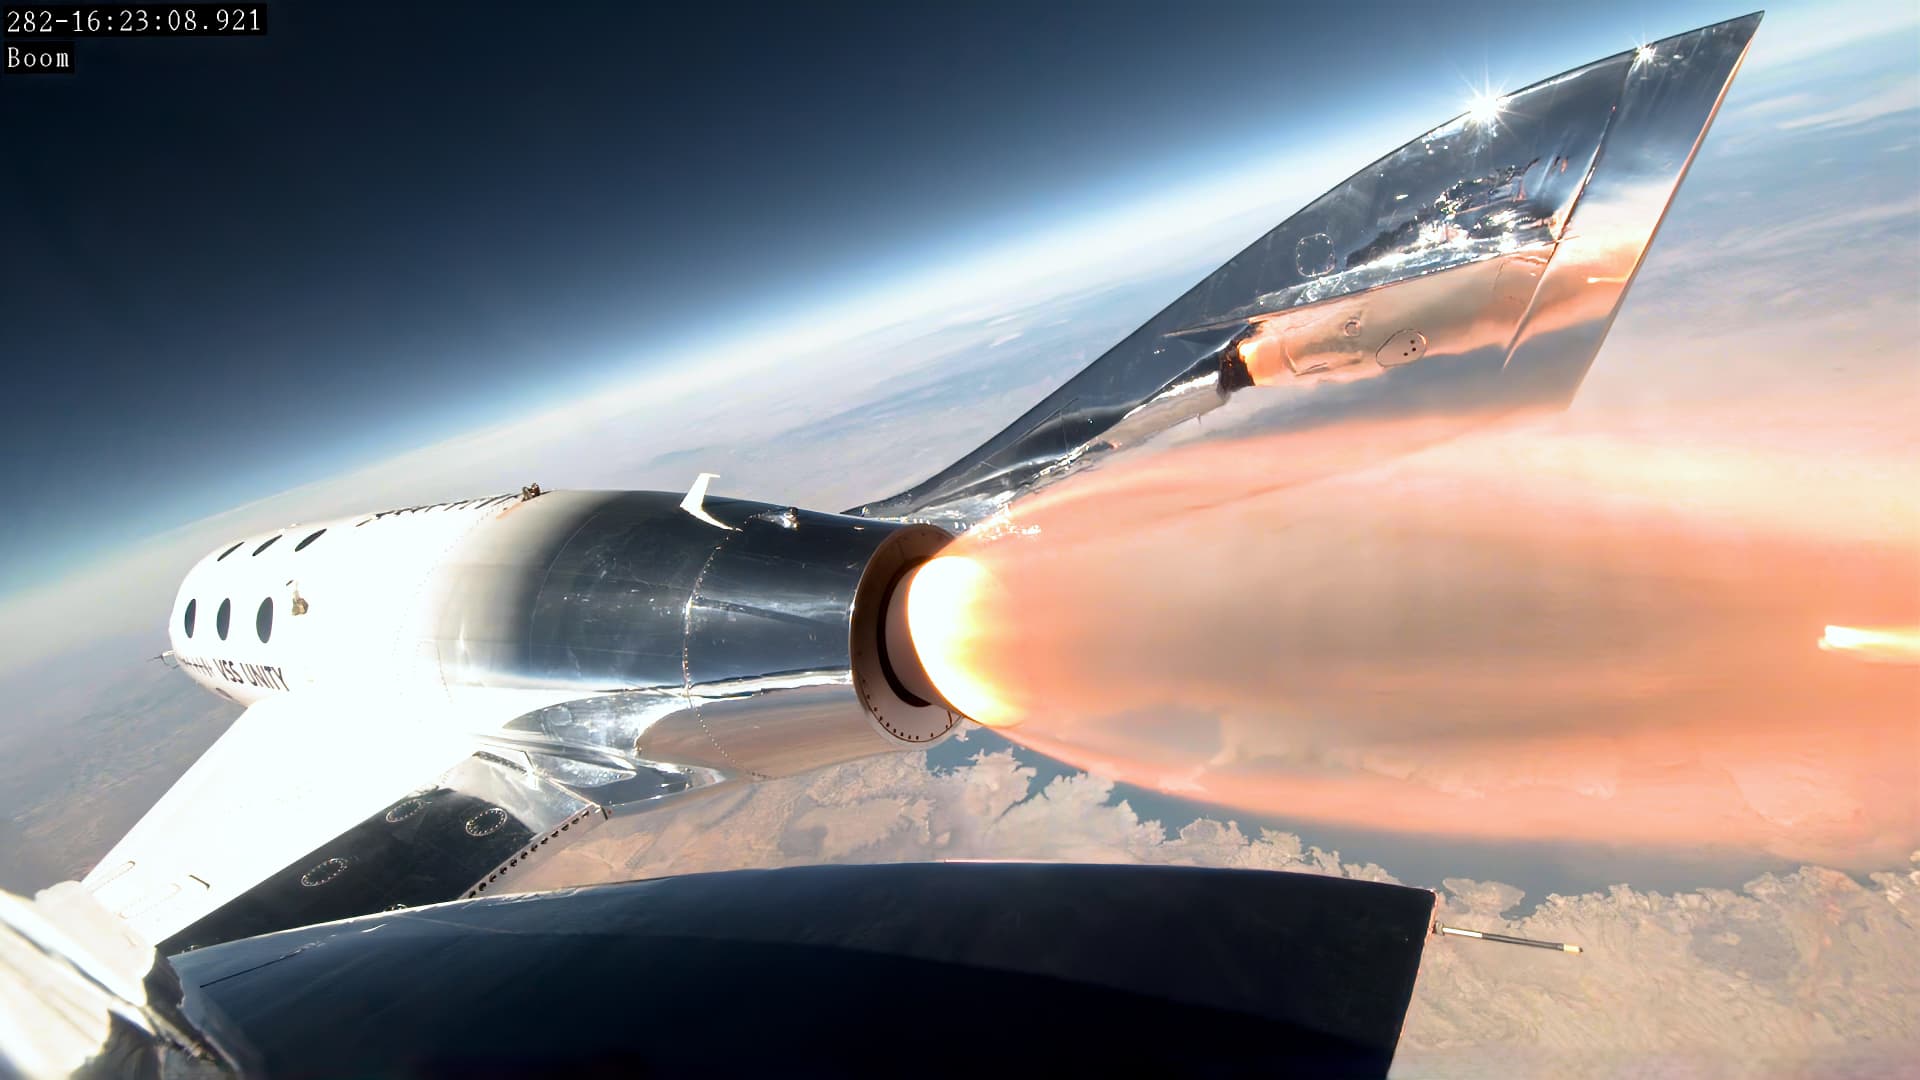 Virgin Galactic sets first commercial space tourism flight for this month; shares spike more than 20%